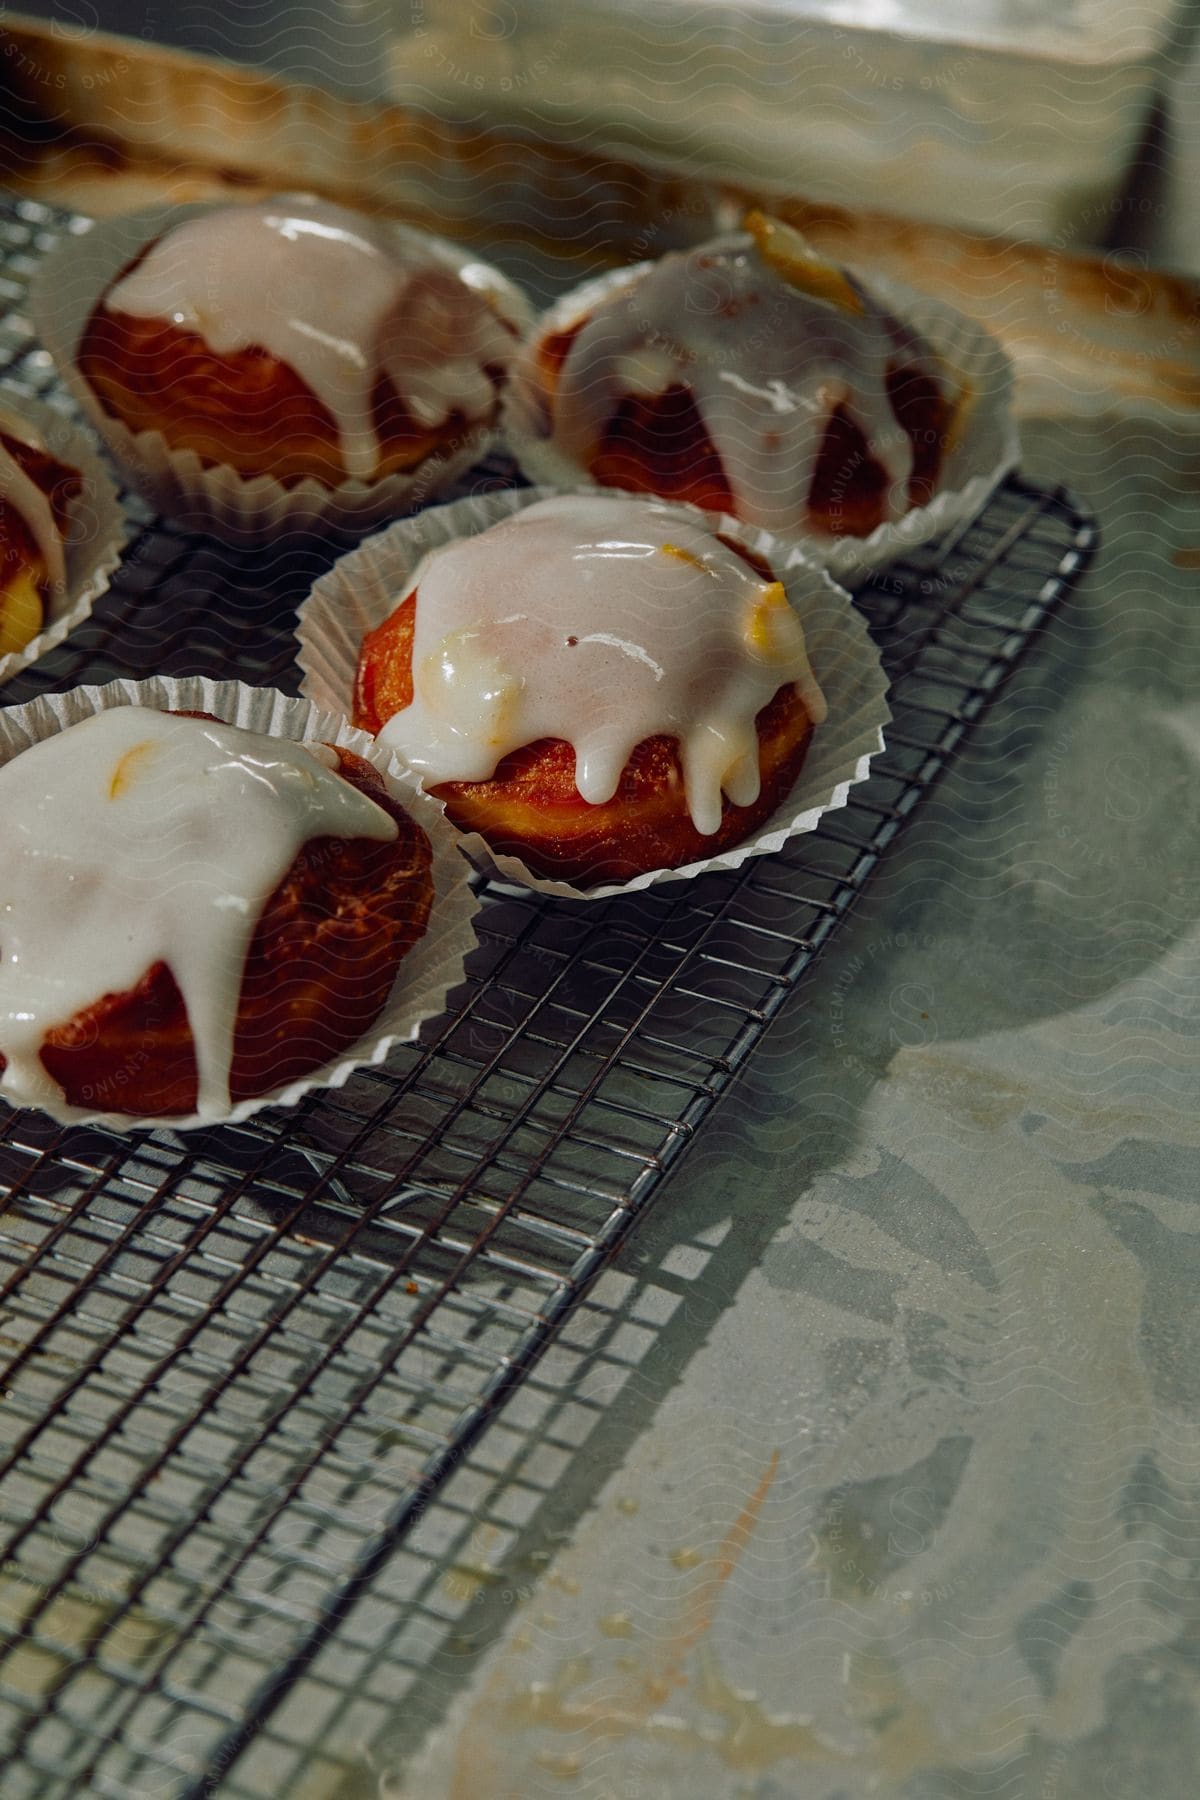 Glazed muffins with orange zest cool on a baking rack in a kitchen